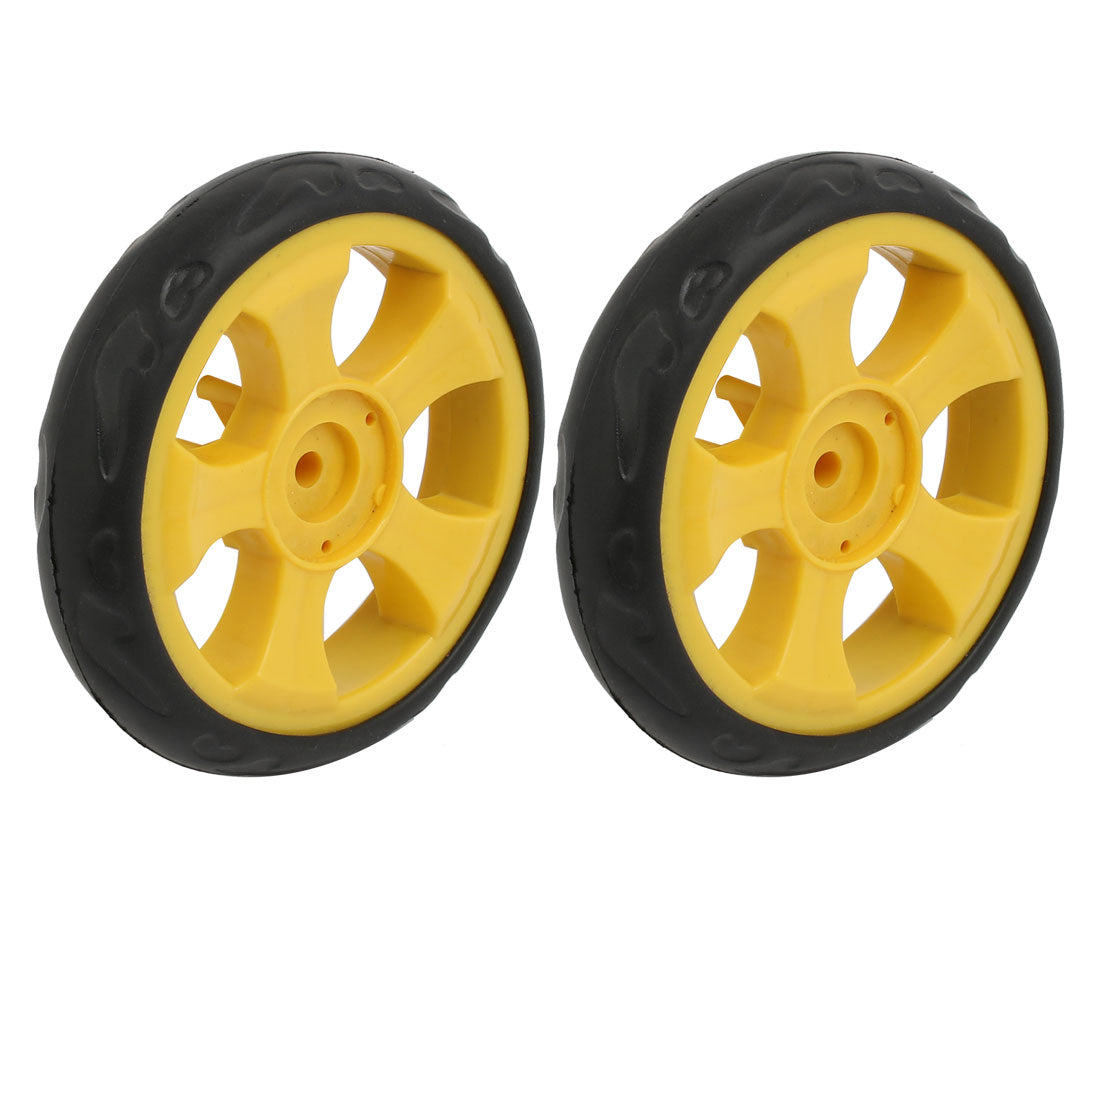 uxcell Uxcell Shopping Cart Wheels Trolley Caster Rubber Foaming 2pcs